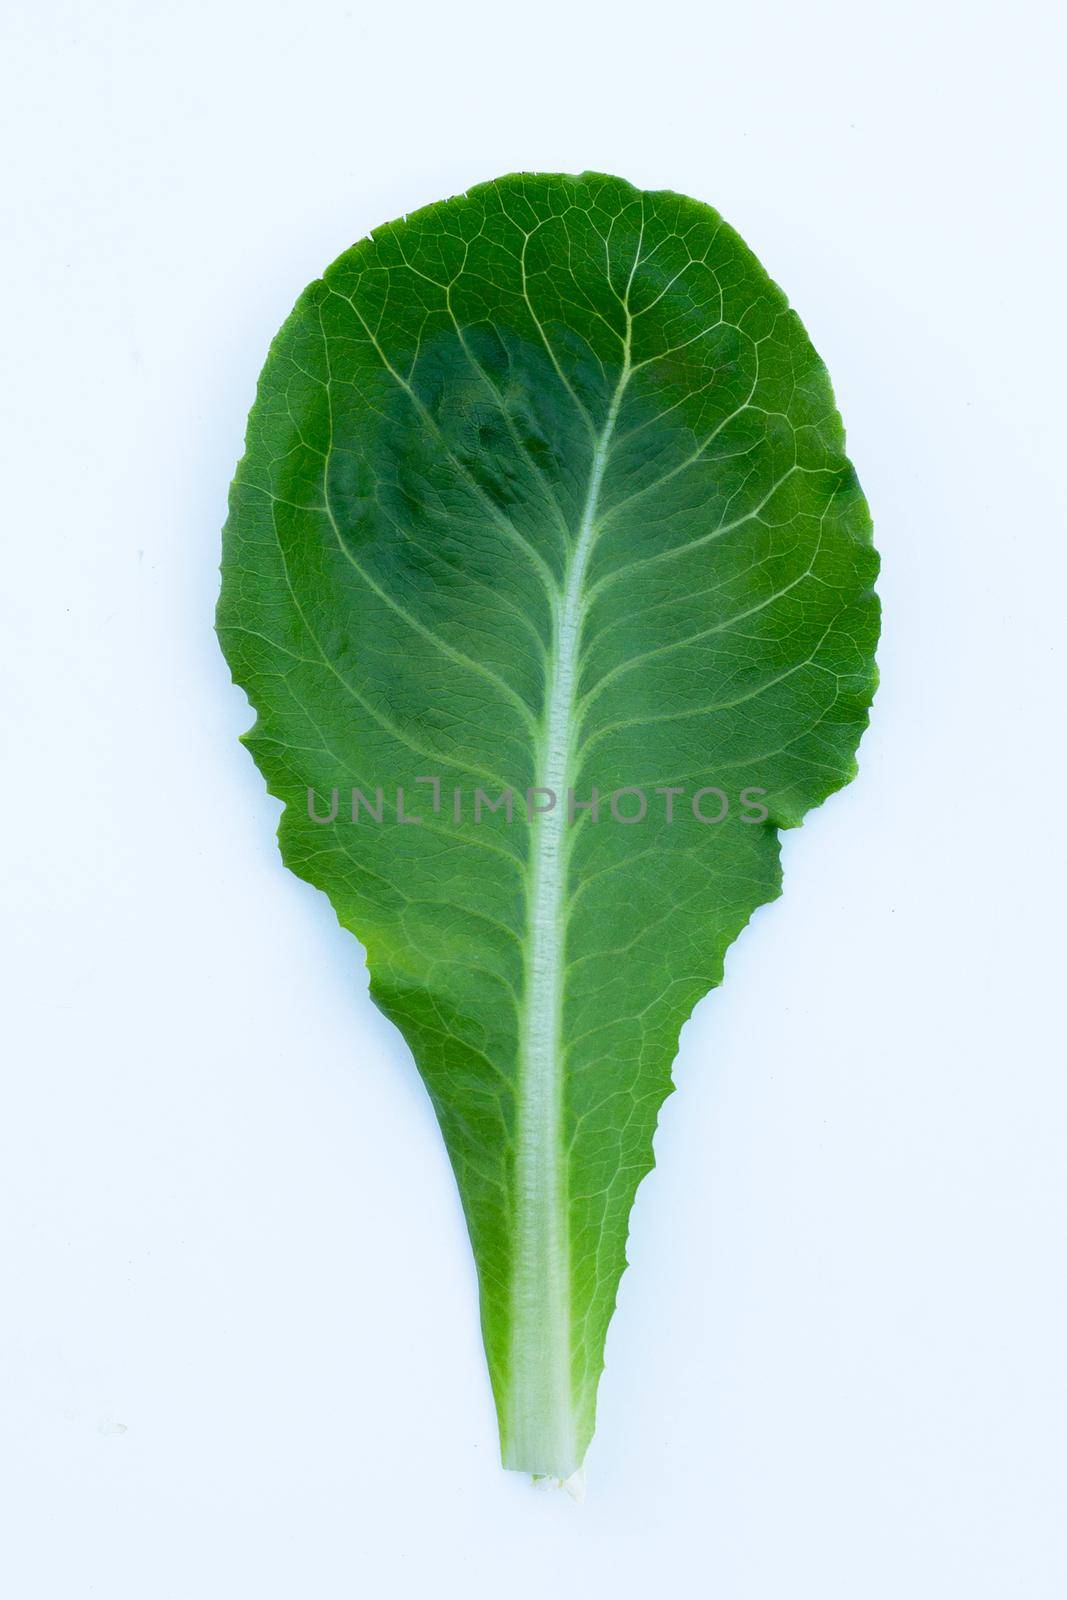 Lettuce leaf on white background. Top view